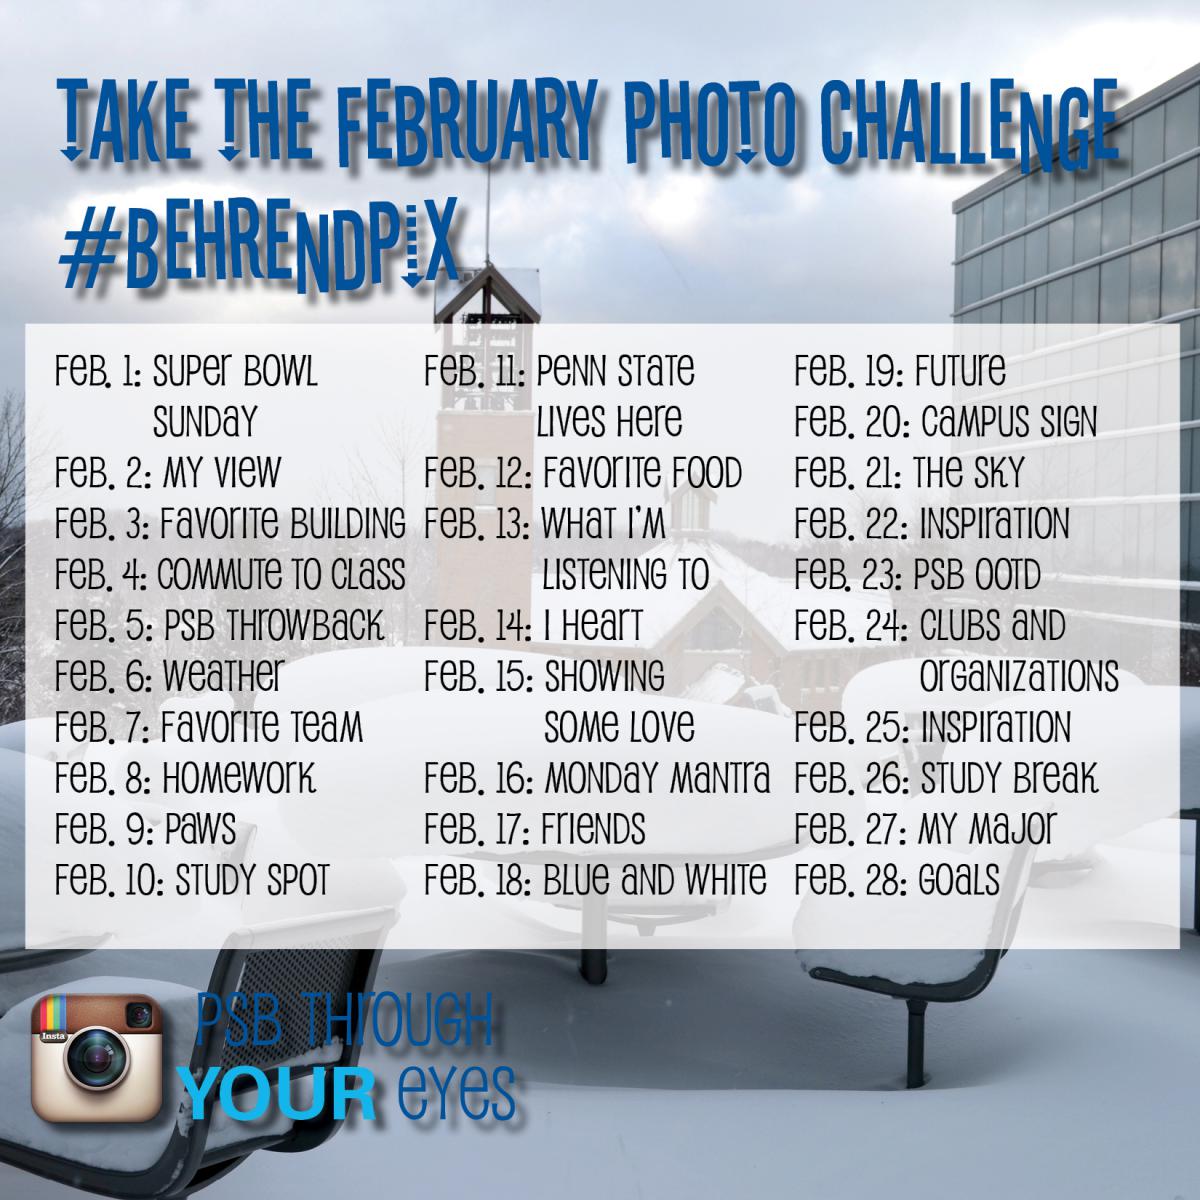 The February Photo Challenge will take place all this month on Instagram.